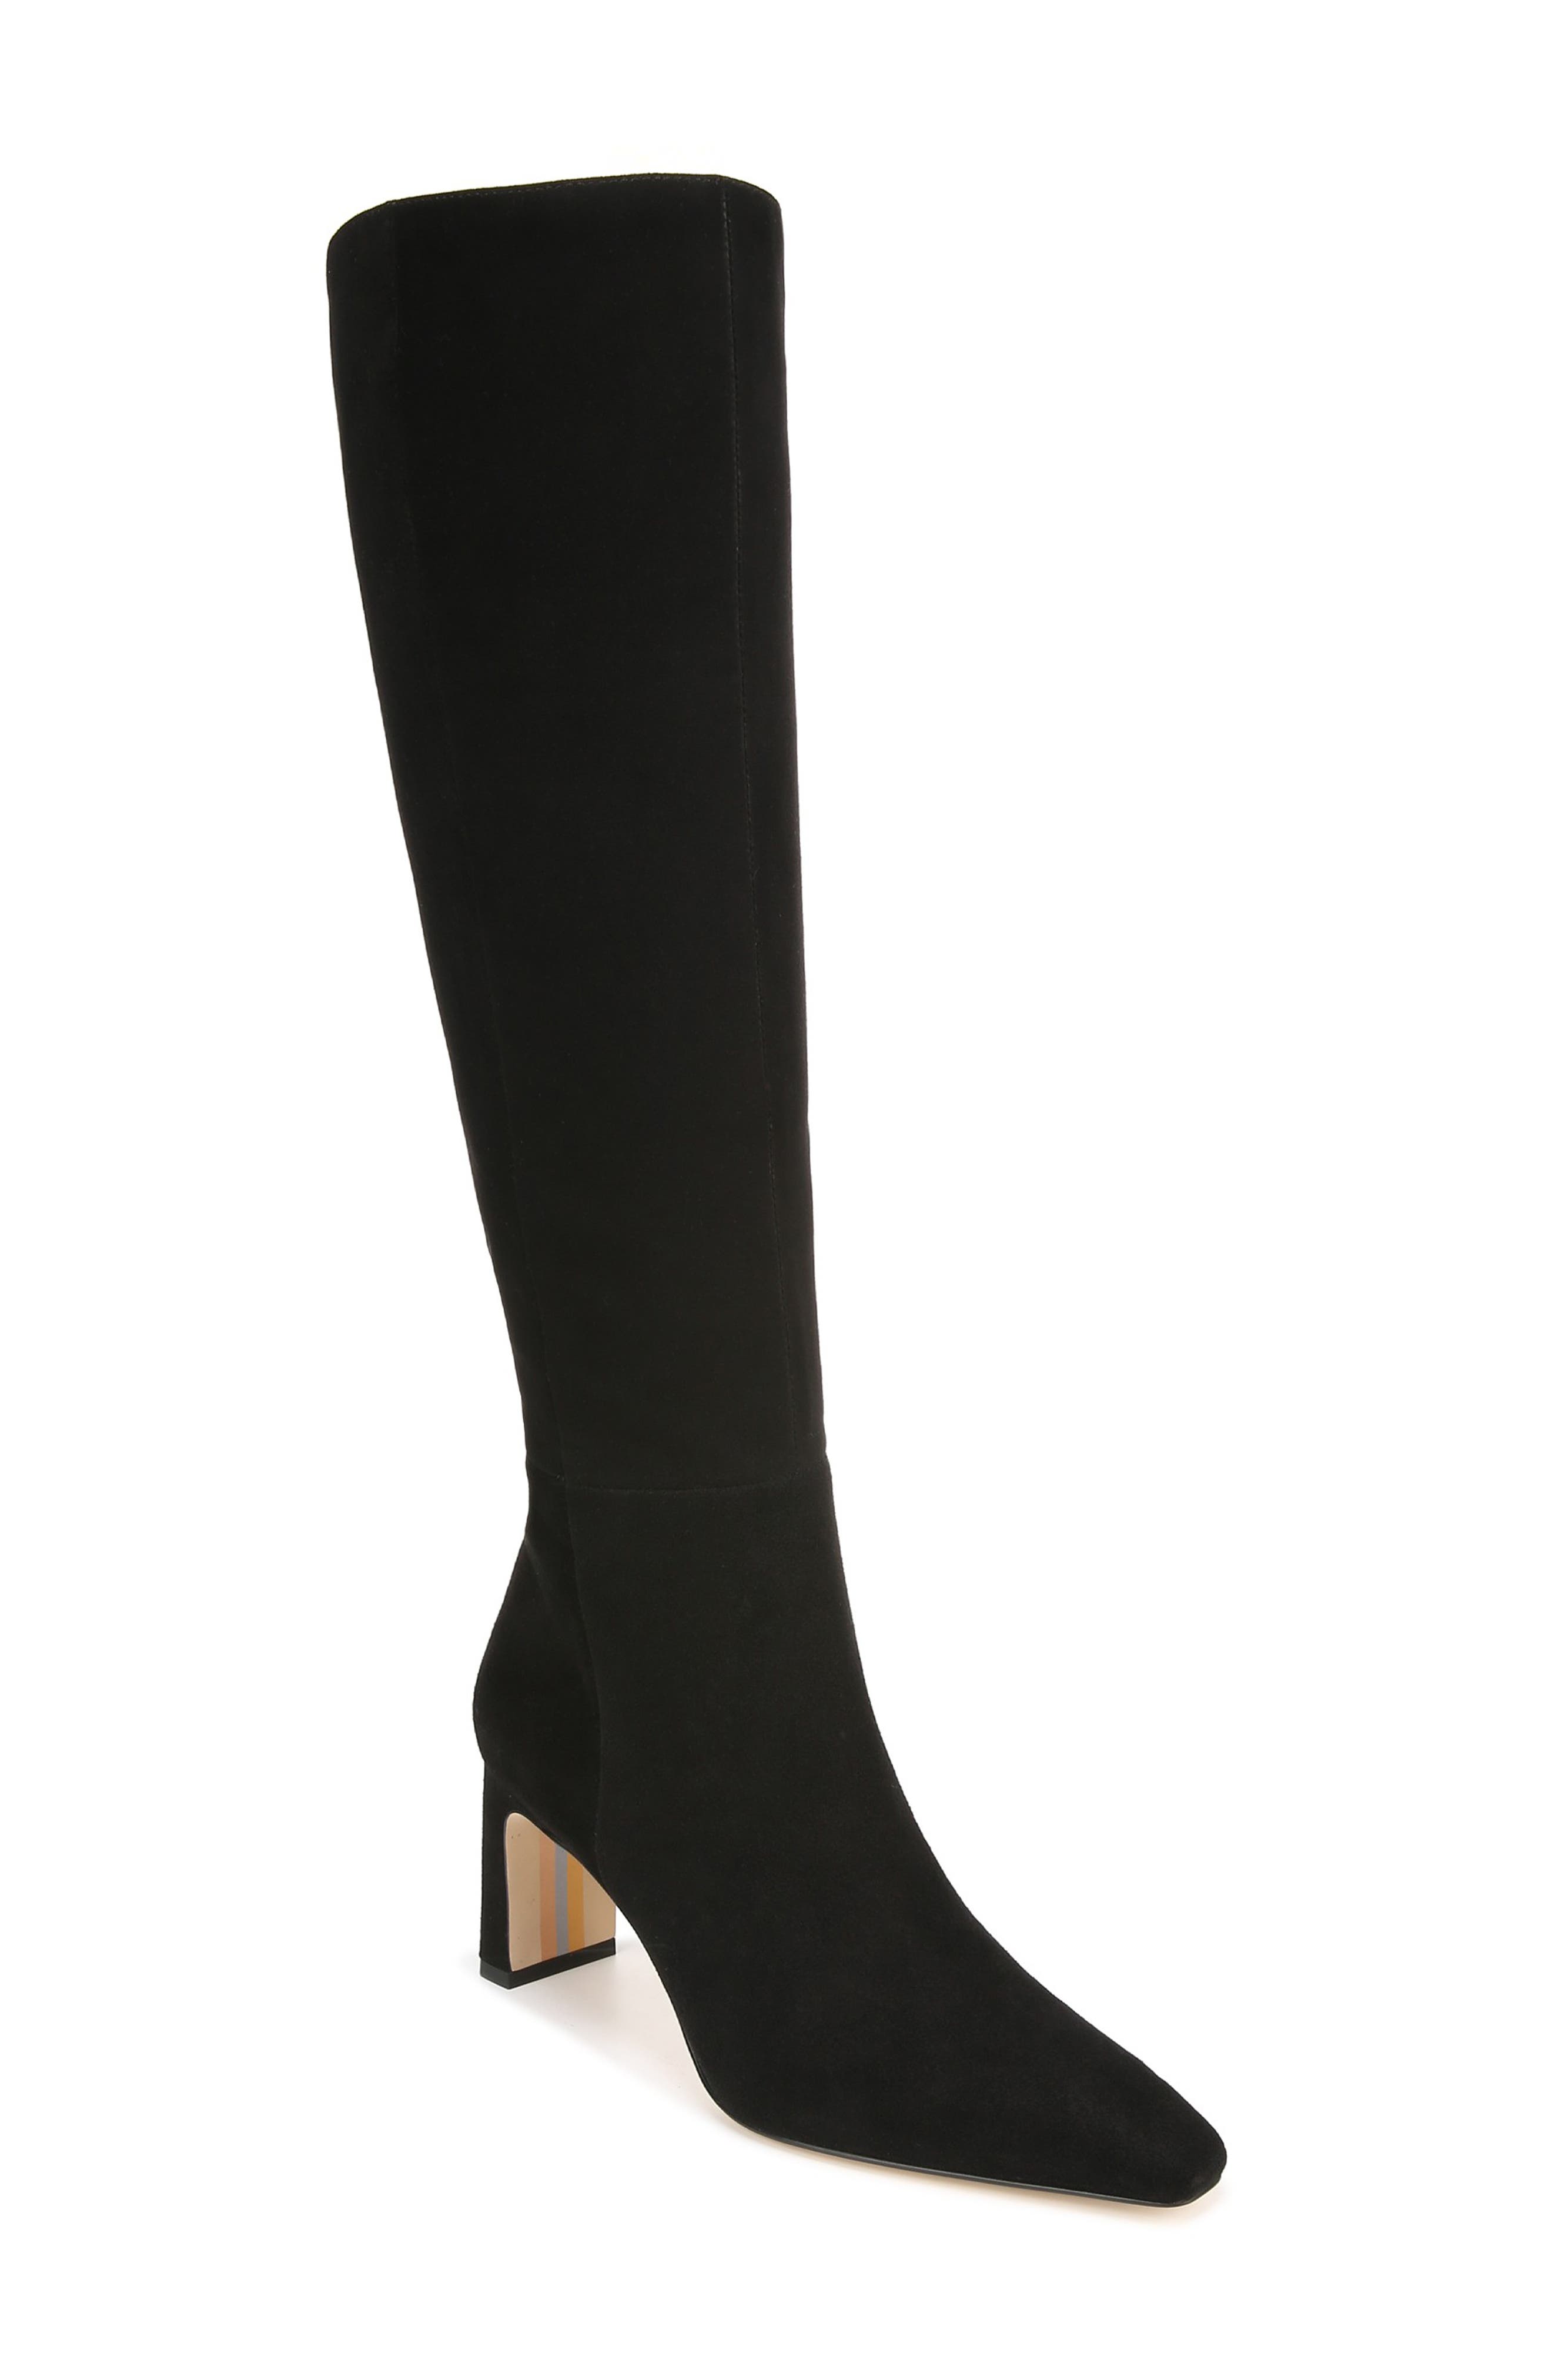 Cece 80 suede knee-high boots